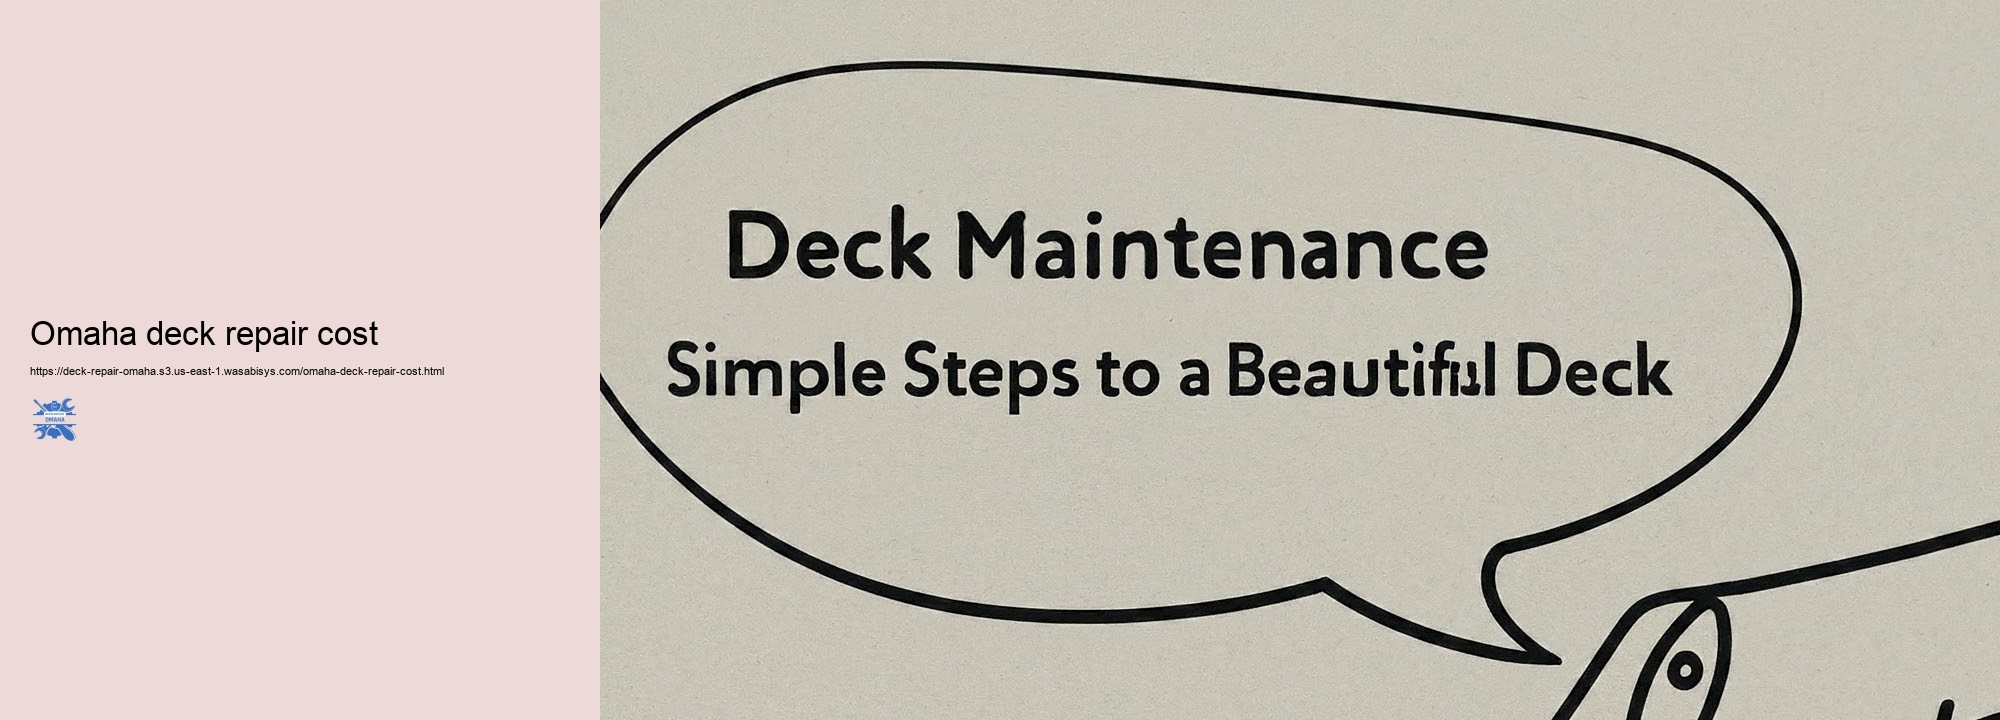 Simply precisely just how to Protect and Take care of Your Deck in Omaha